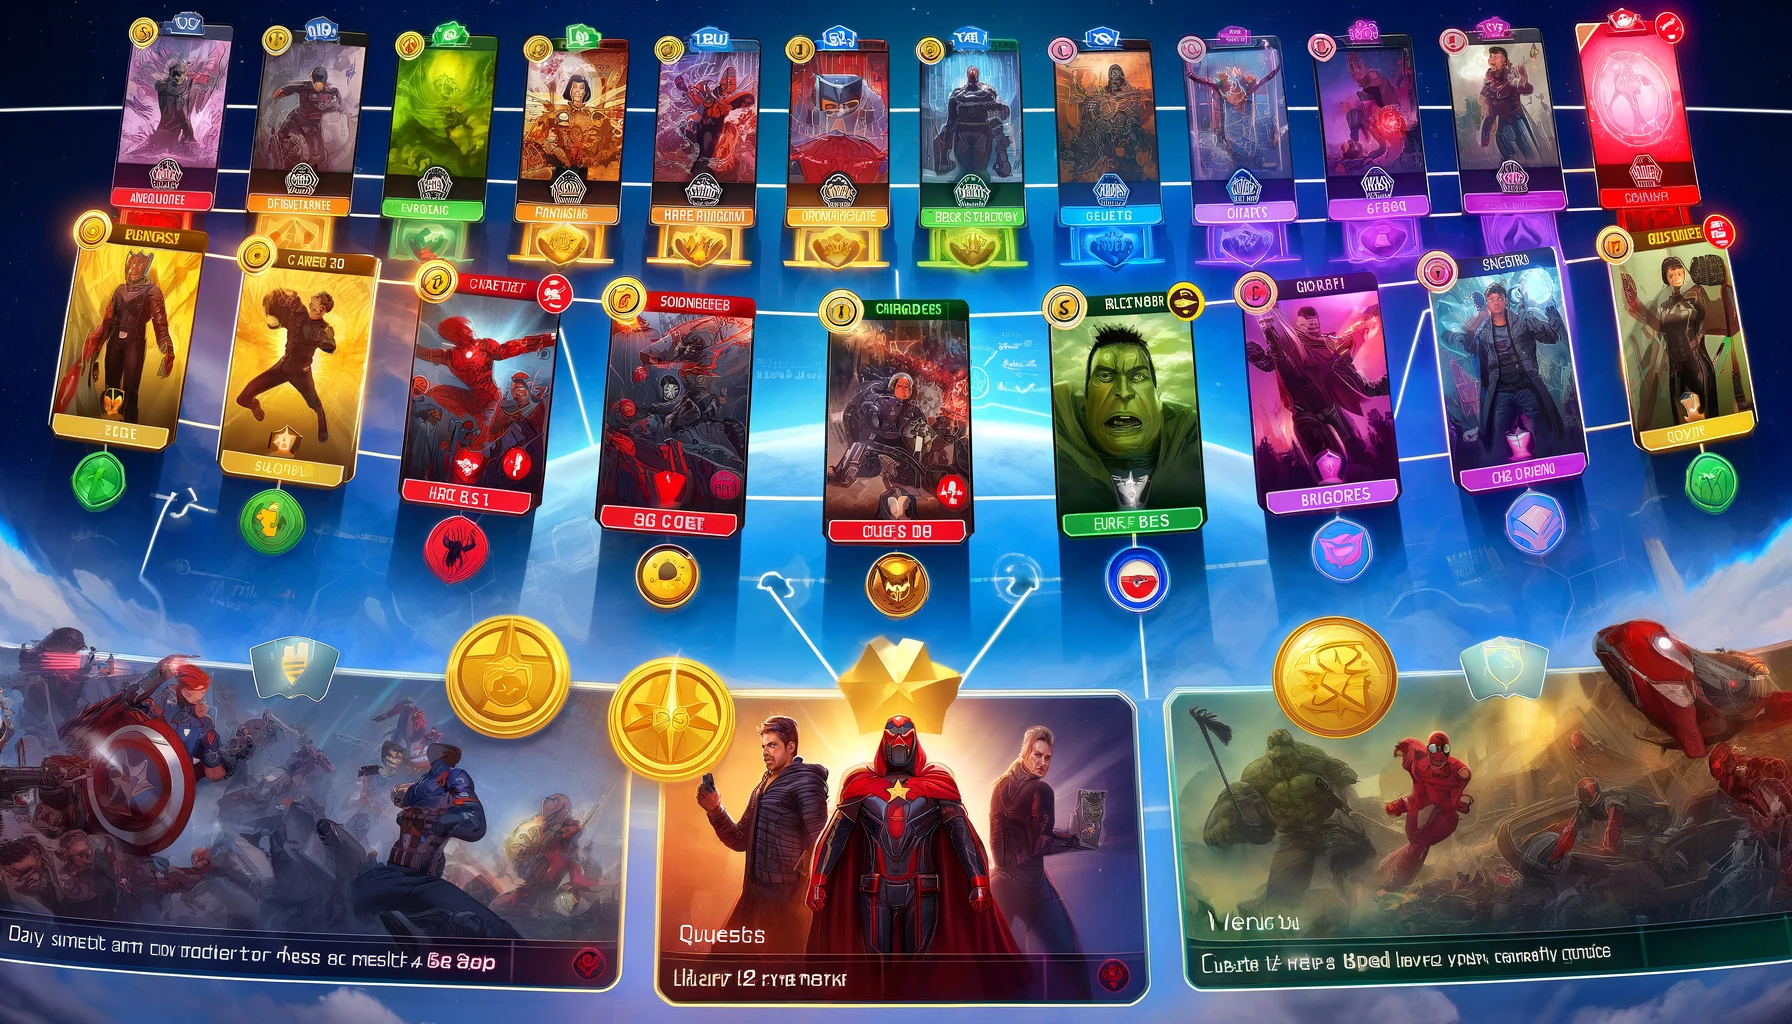 Vibrant Marvel cards are arranged with indicators for daily and weekly quests, credits, gold, and boosters. Superheroes and villains symbolize the rewards earned through challenges. Various missions are in progress, showcasing the strategic benefits for card collection.